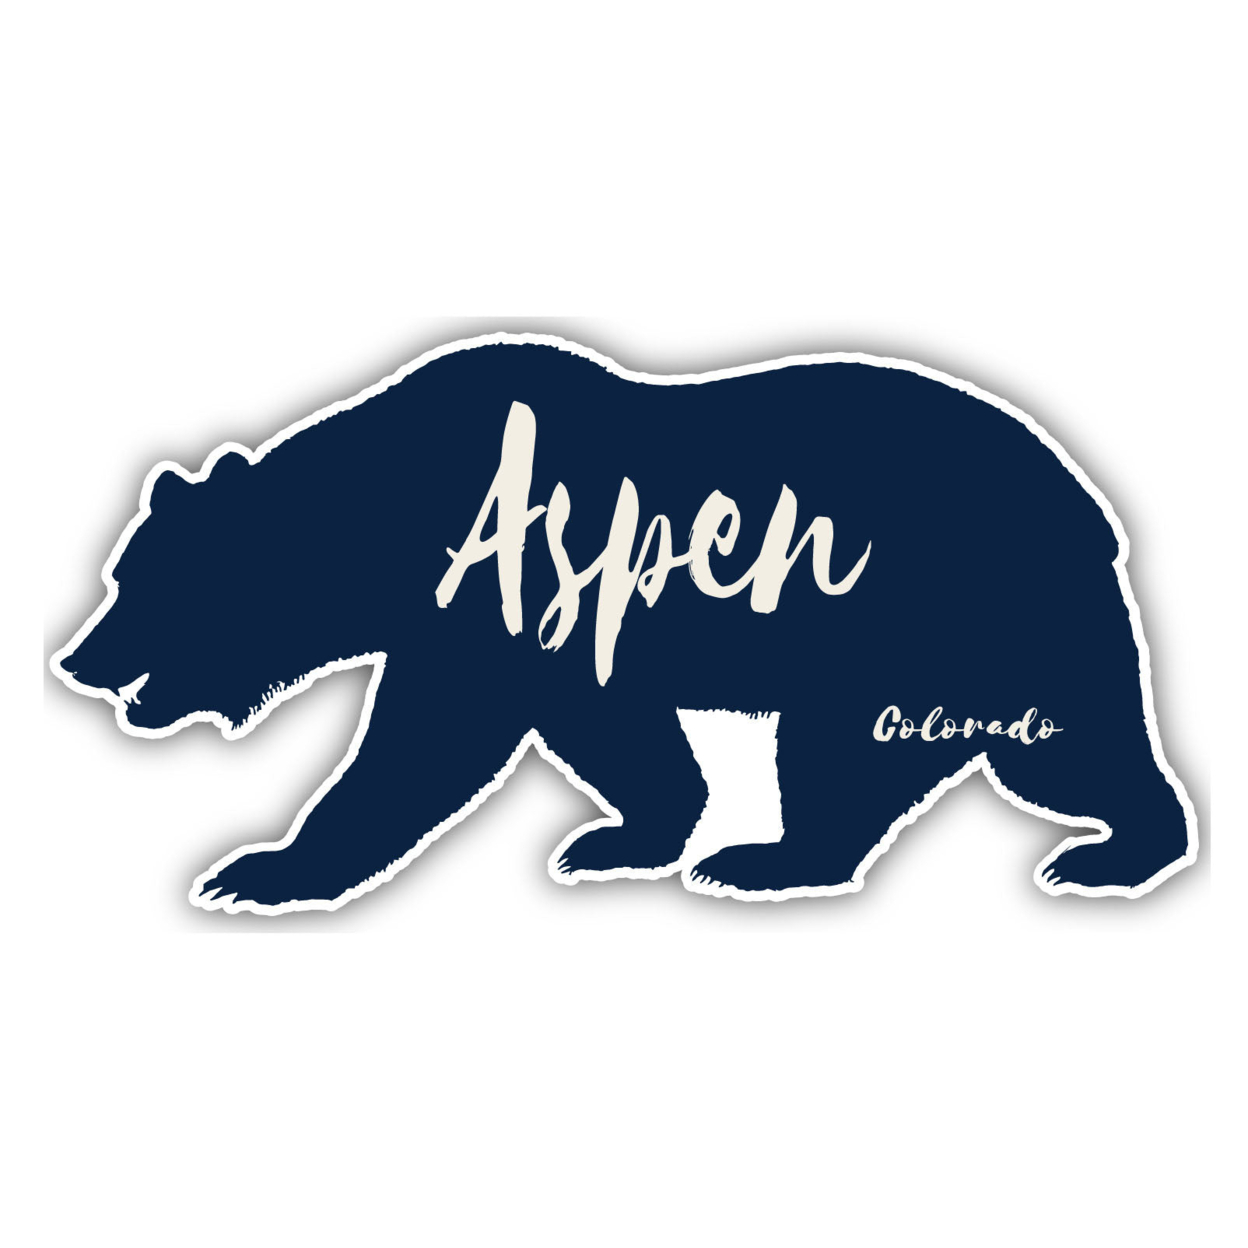 Aspen Colorado Souvenir Decorative Stickers (Choose Theme And Size) - 4-Pack, 8-Inch, Great Outdoors